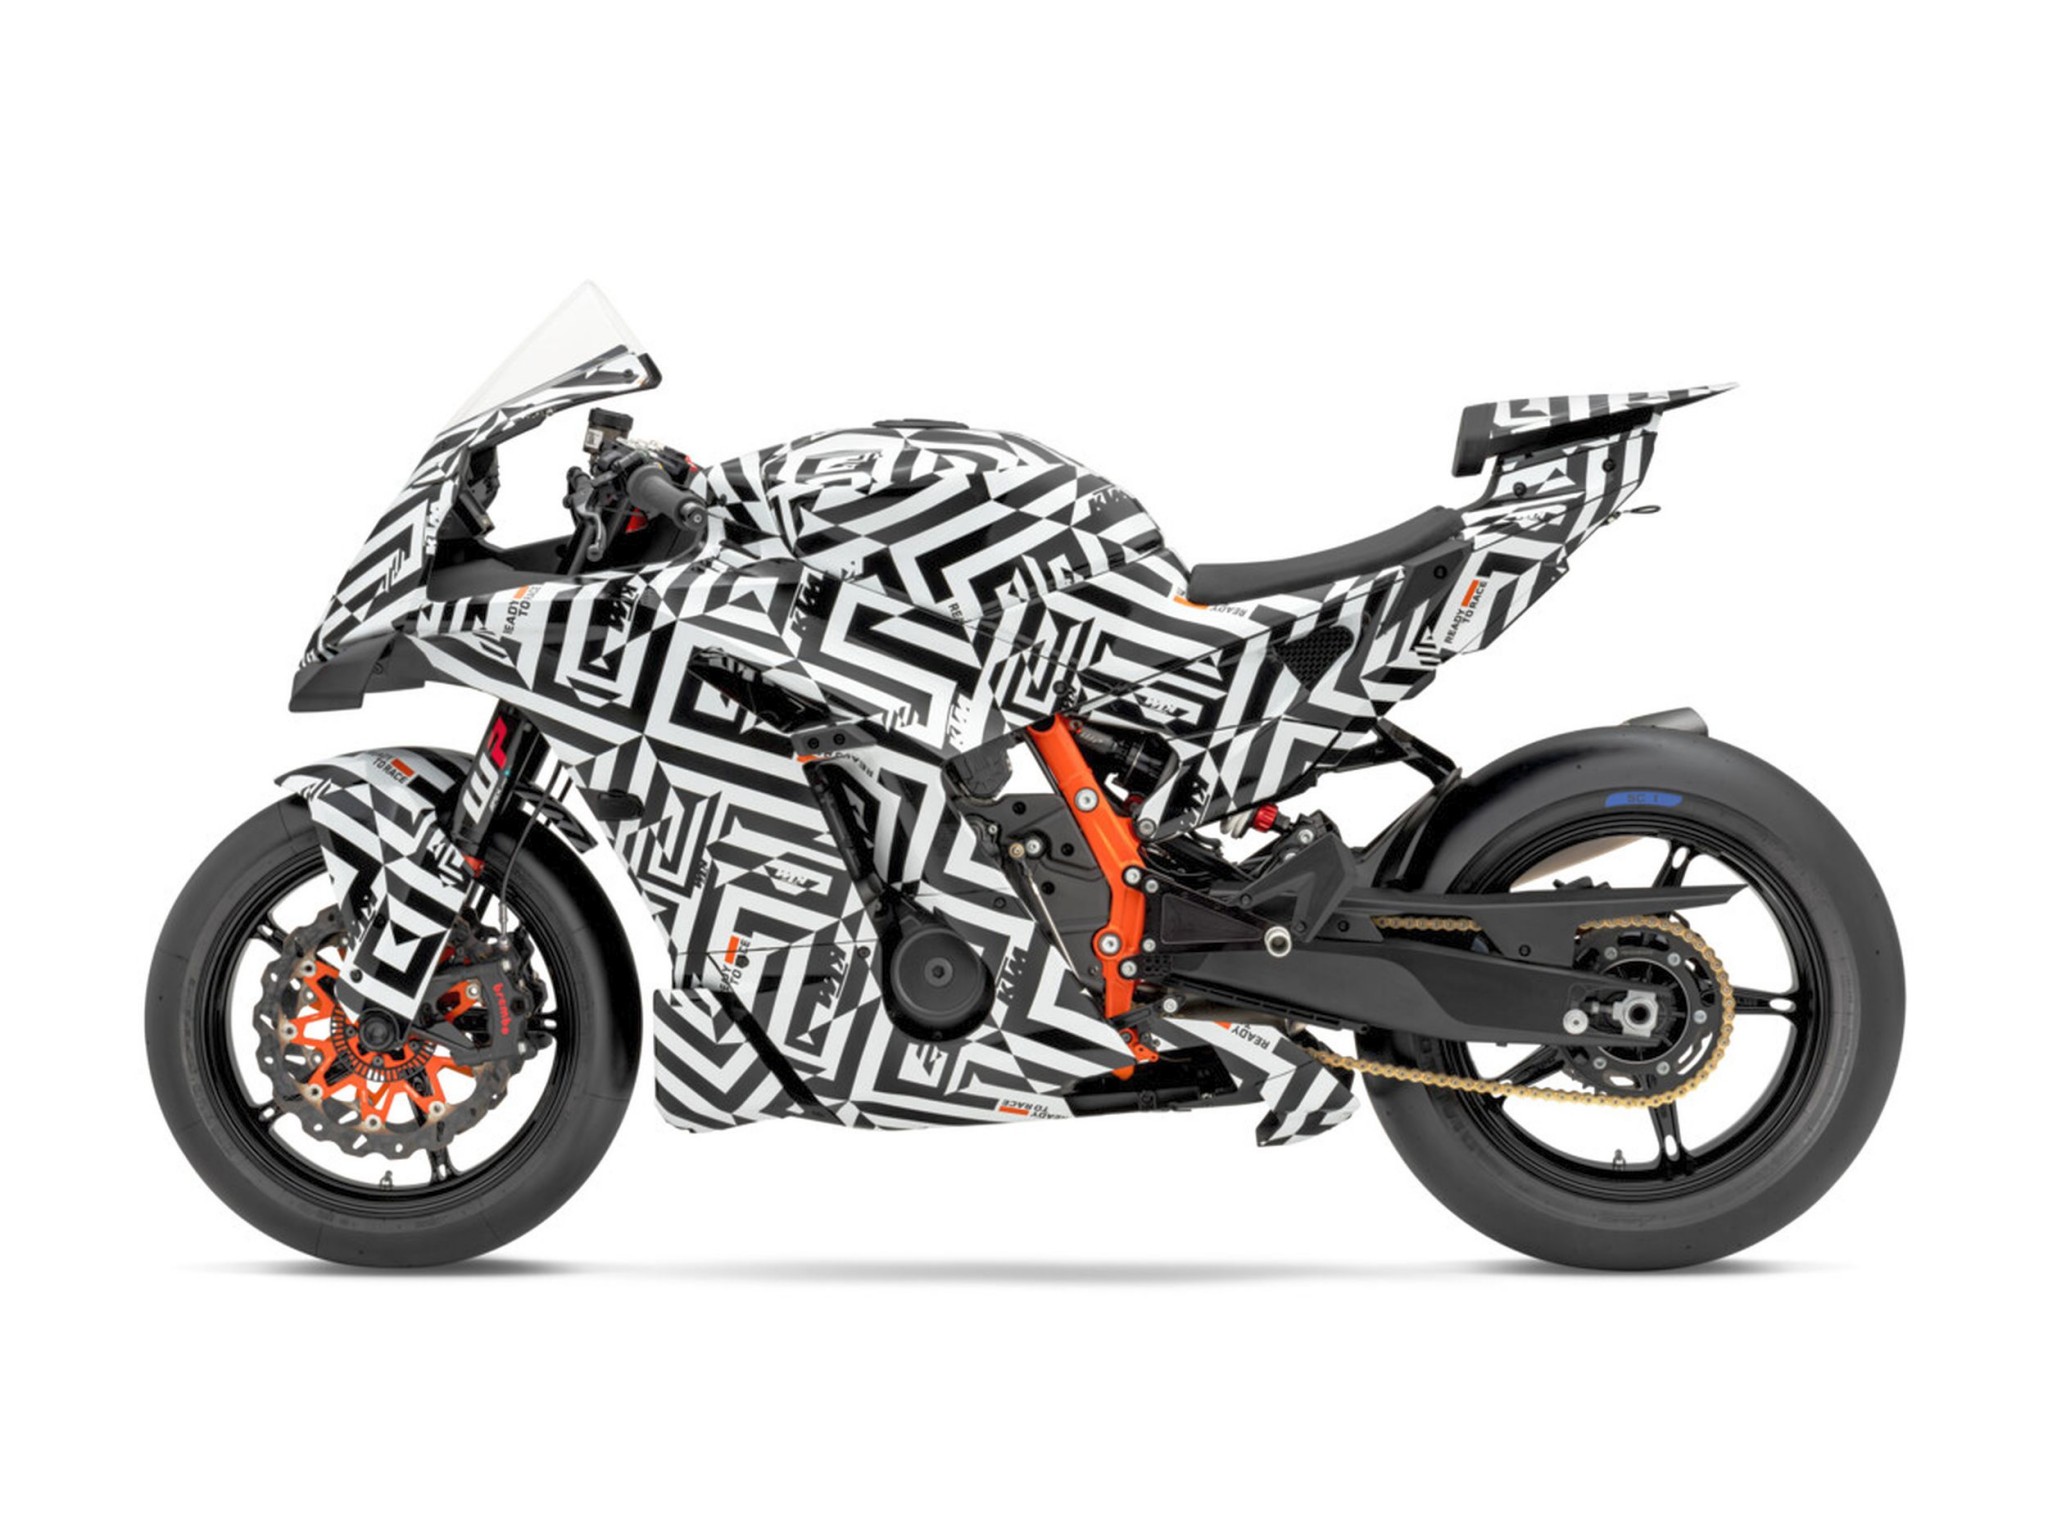 KTM 990 RC R - finally the thoroughbred sports bike for the road! - Image 50